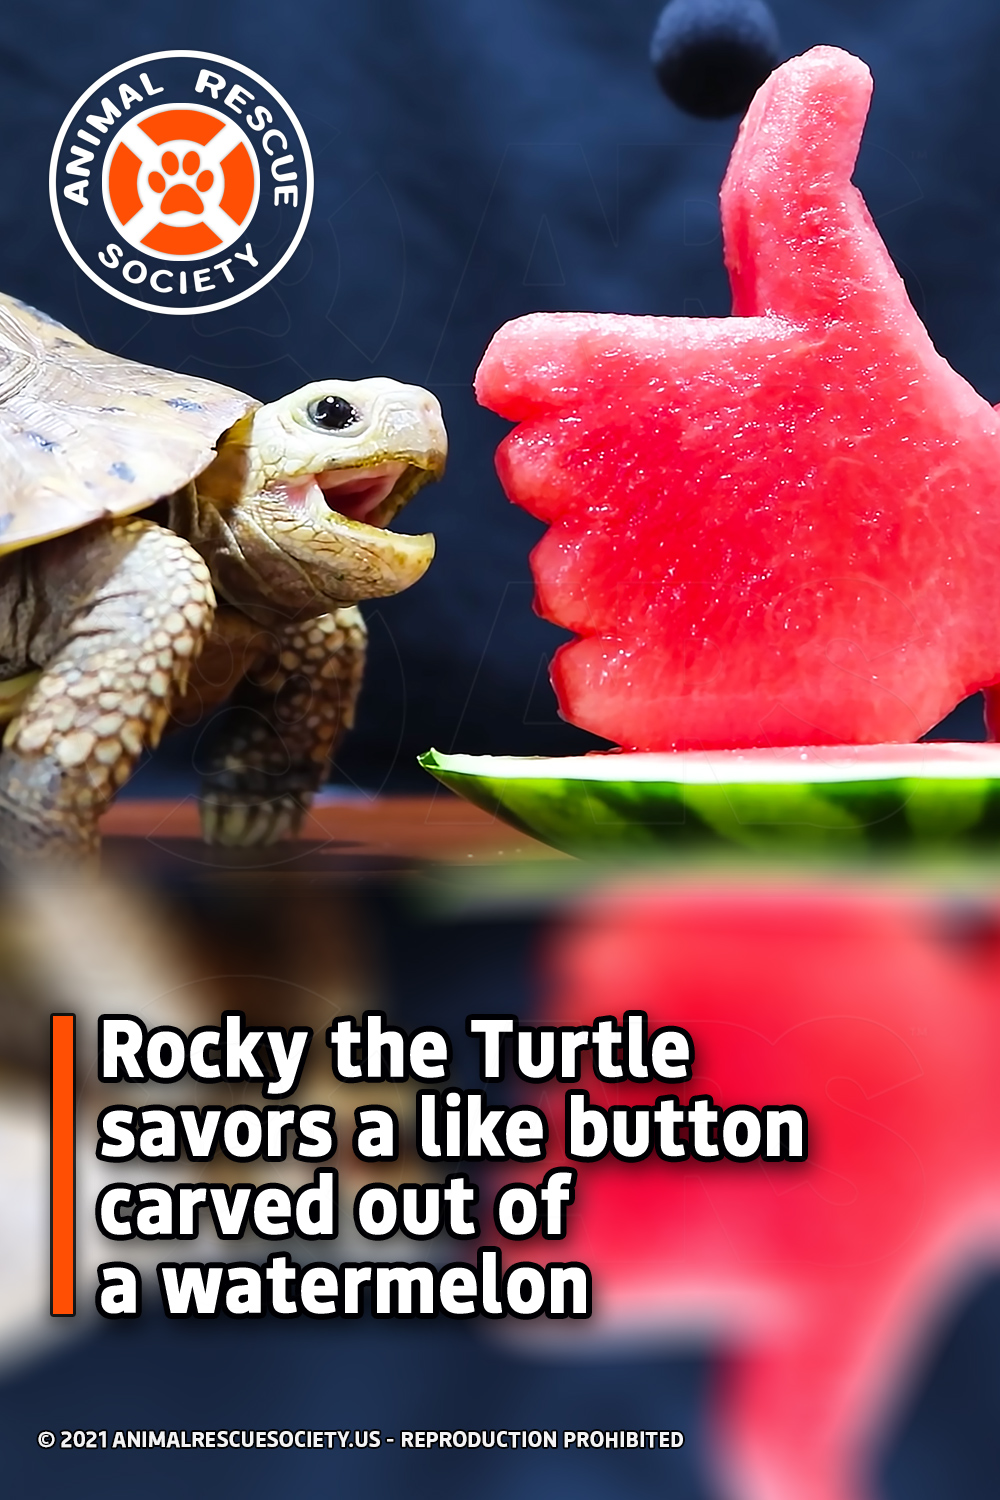 Rocky the Turtle savors a like button carved out of a watermelon